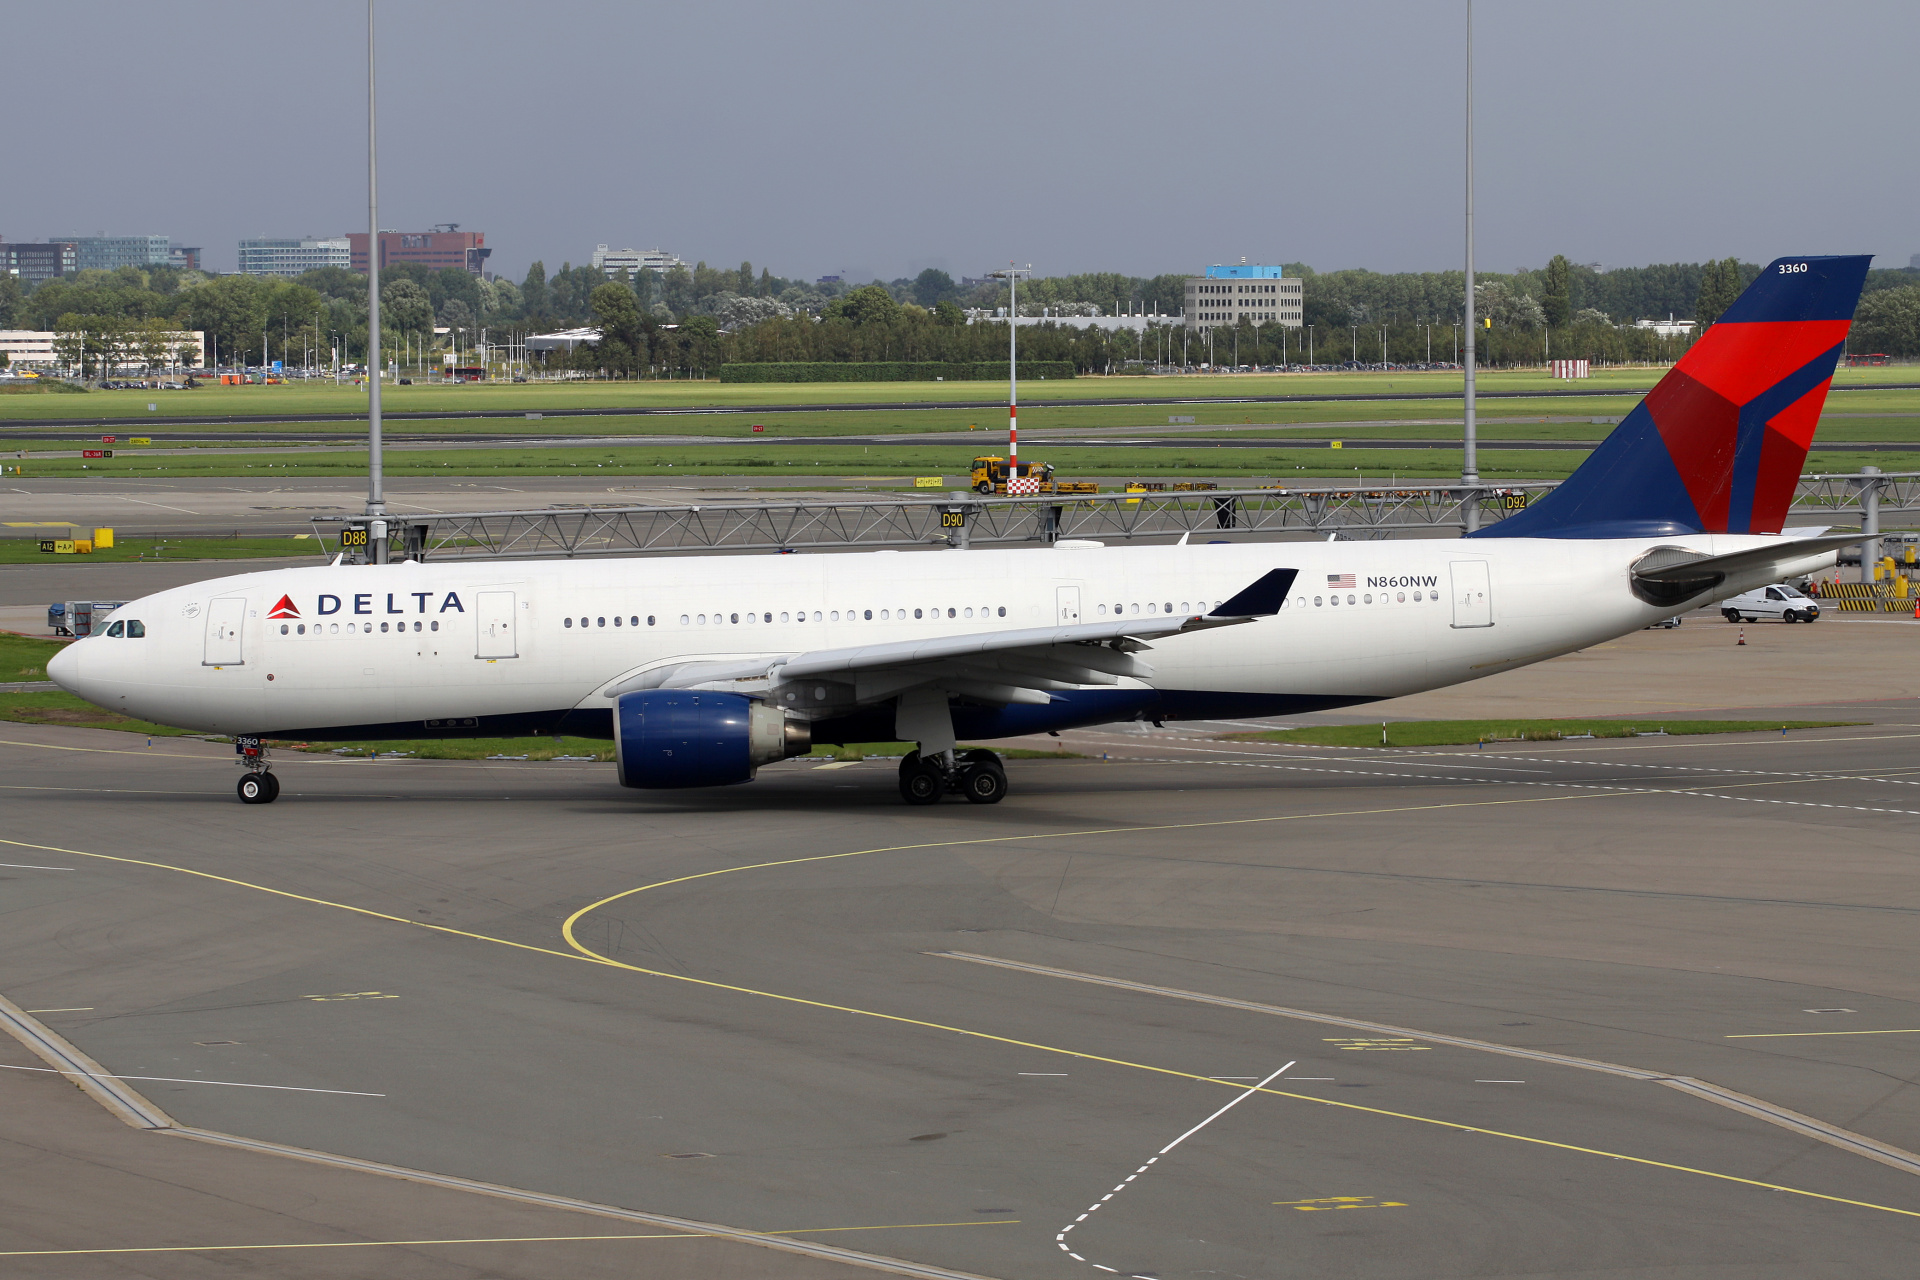 N860NW, Delta Airlines (Aircraft » Schiphol Spotting » Airbus A330-200)